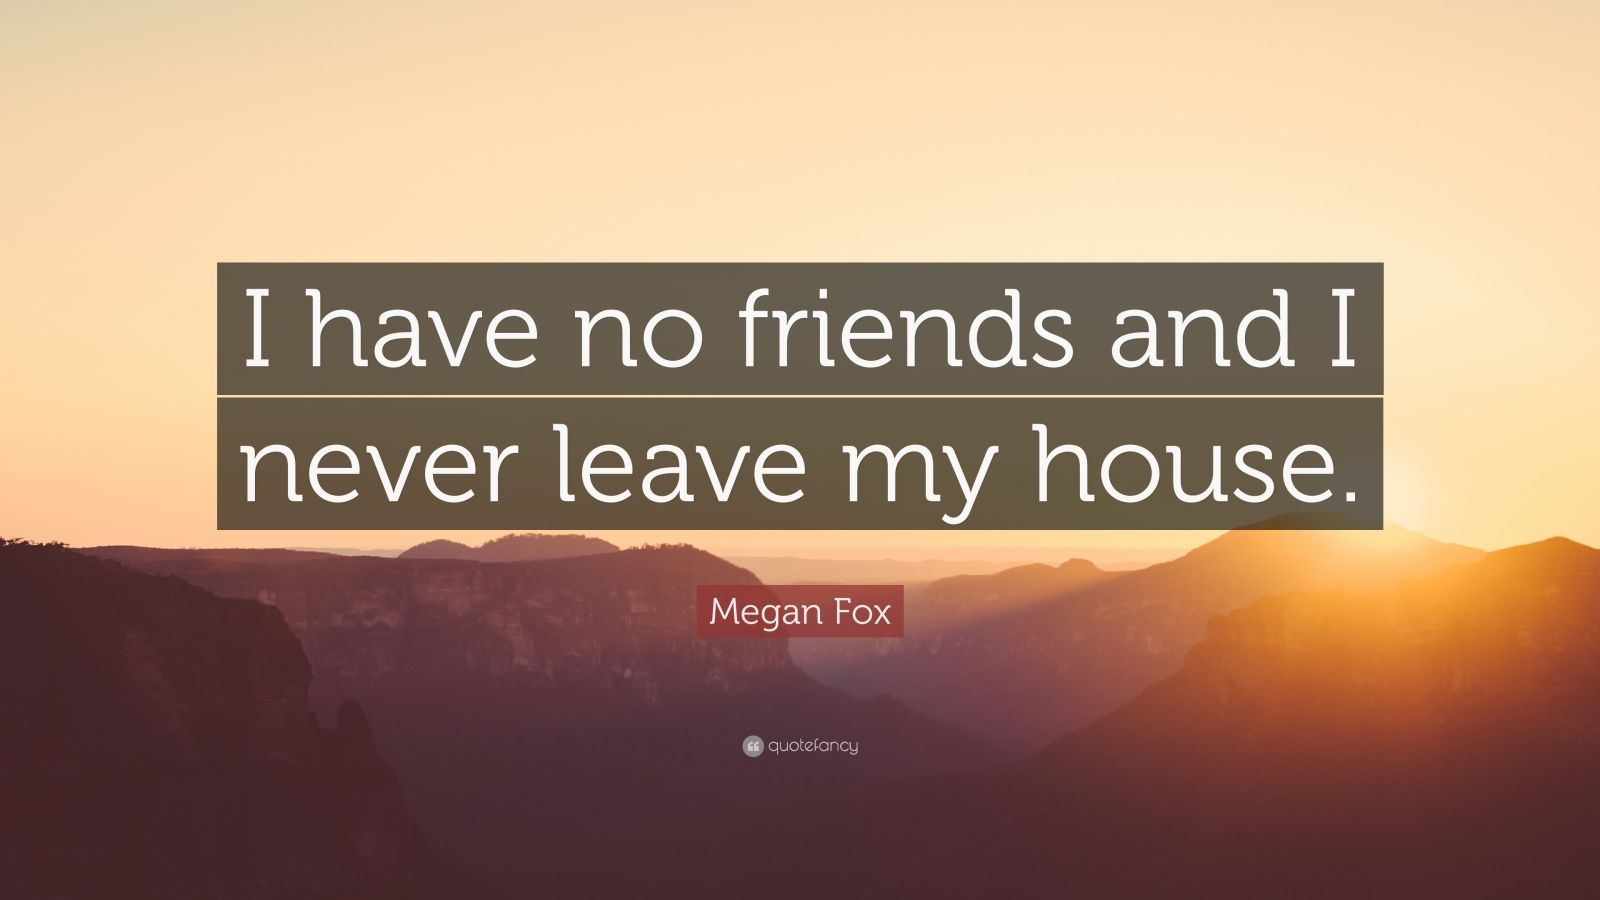 Megan Fox Quote: “I have no friends and I never leave my house.”